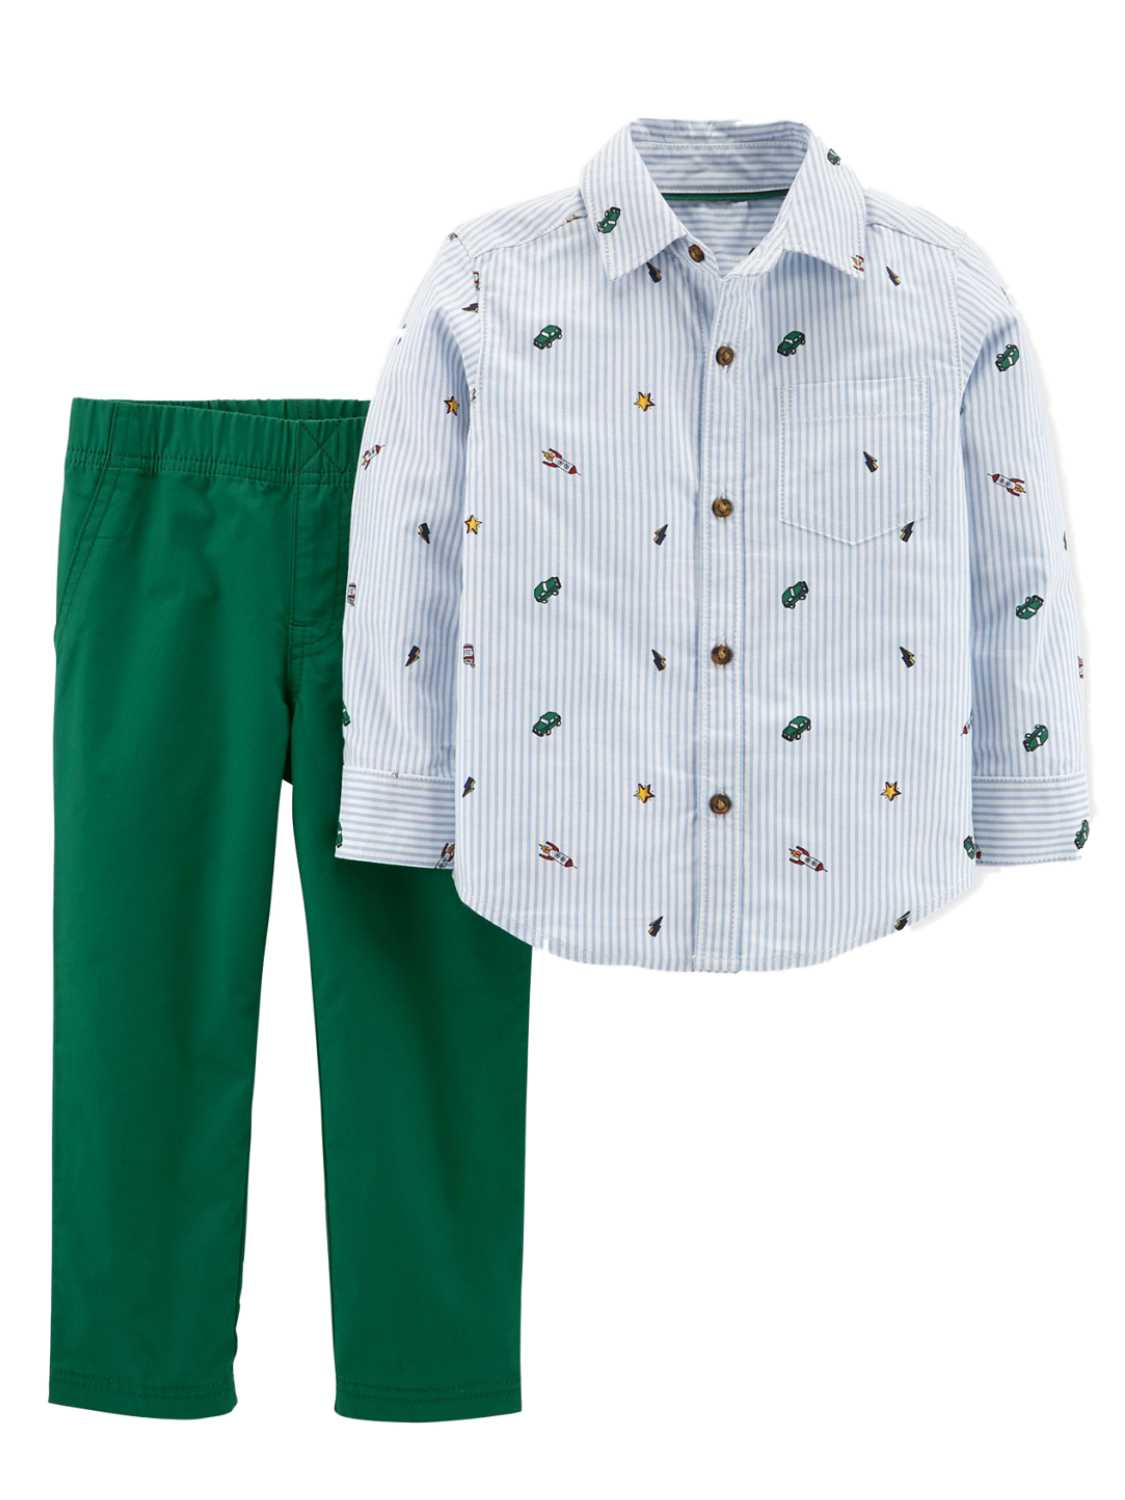 Carter's Carters Infant Boys Button Up Blue Striped Collared Shirt & Green Pants Set